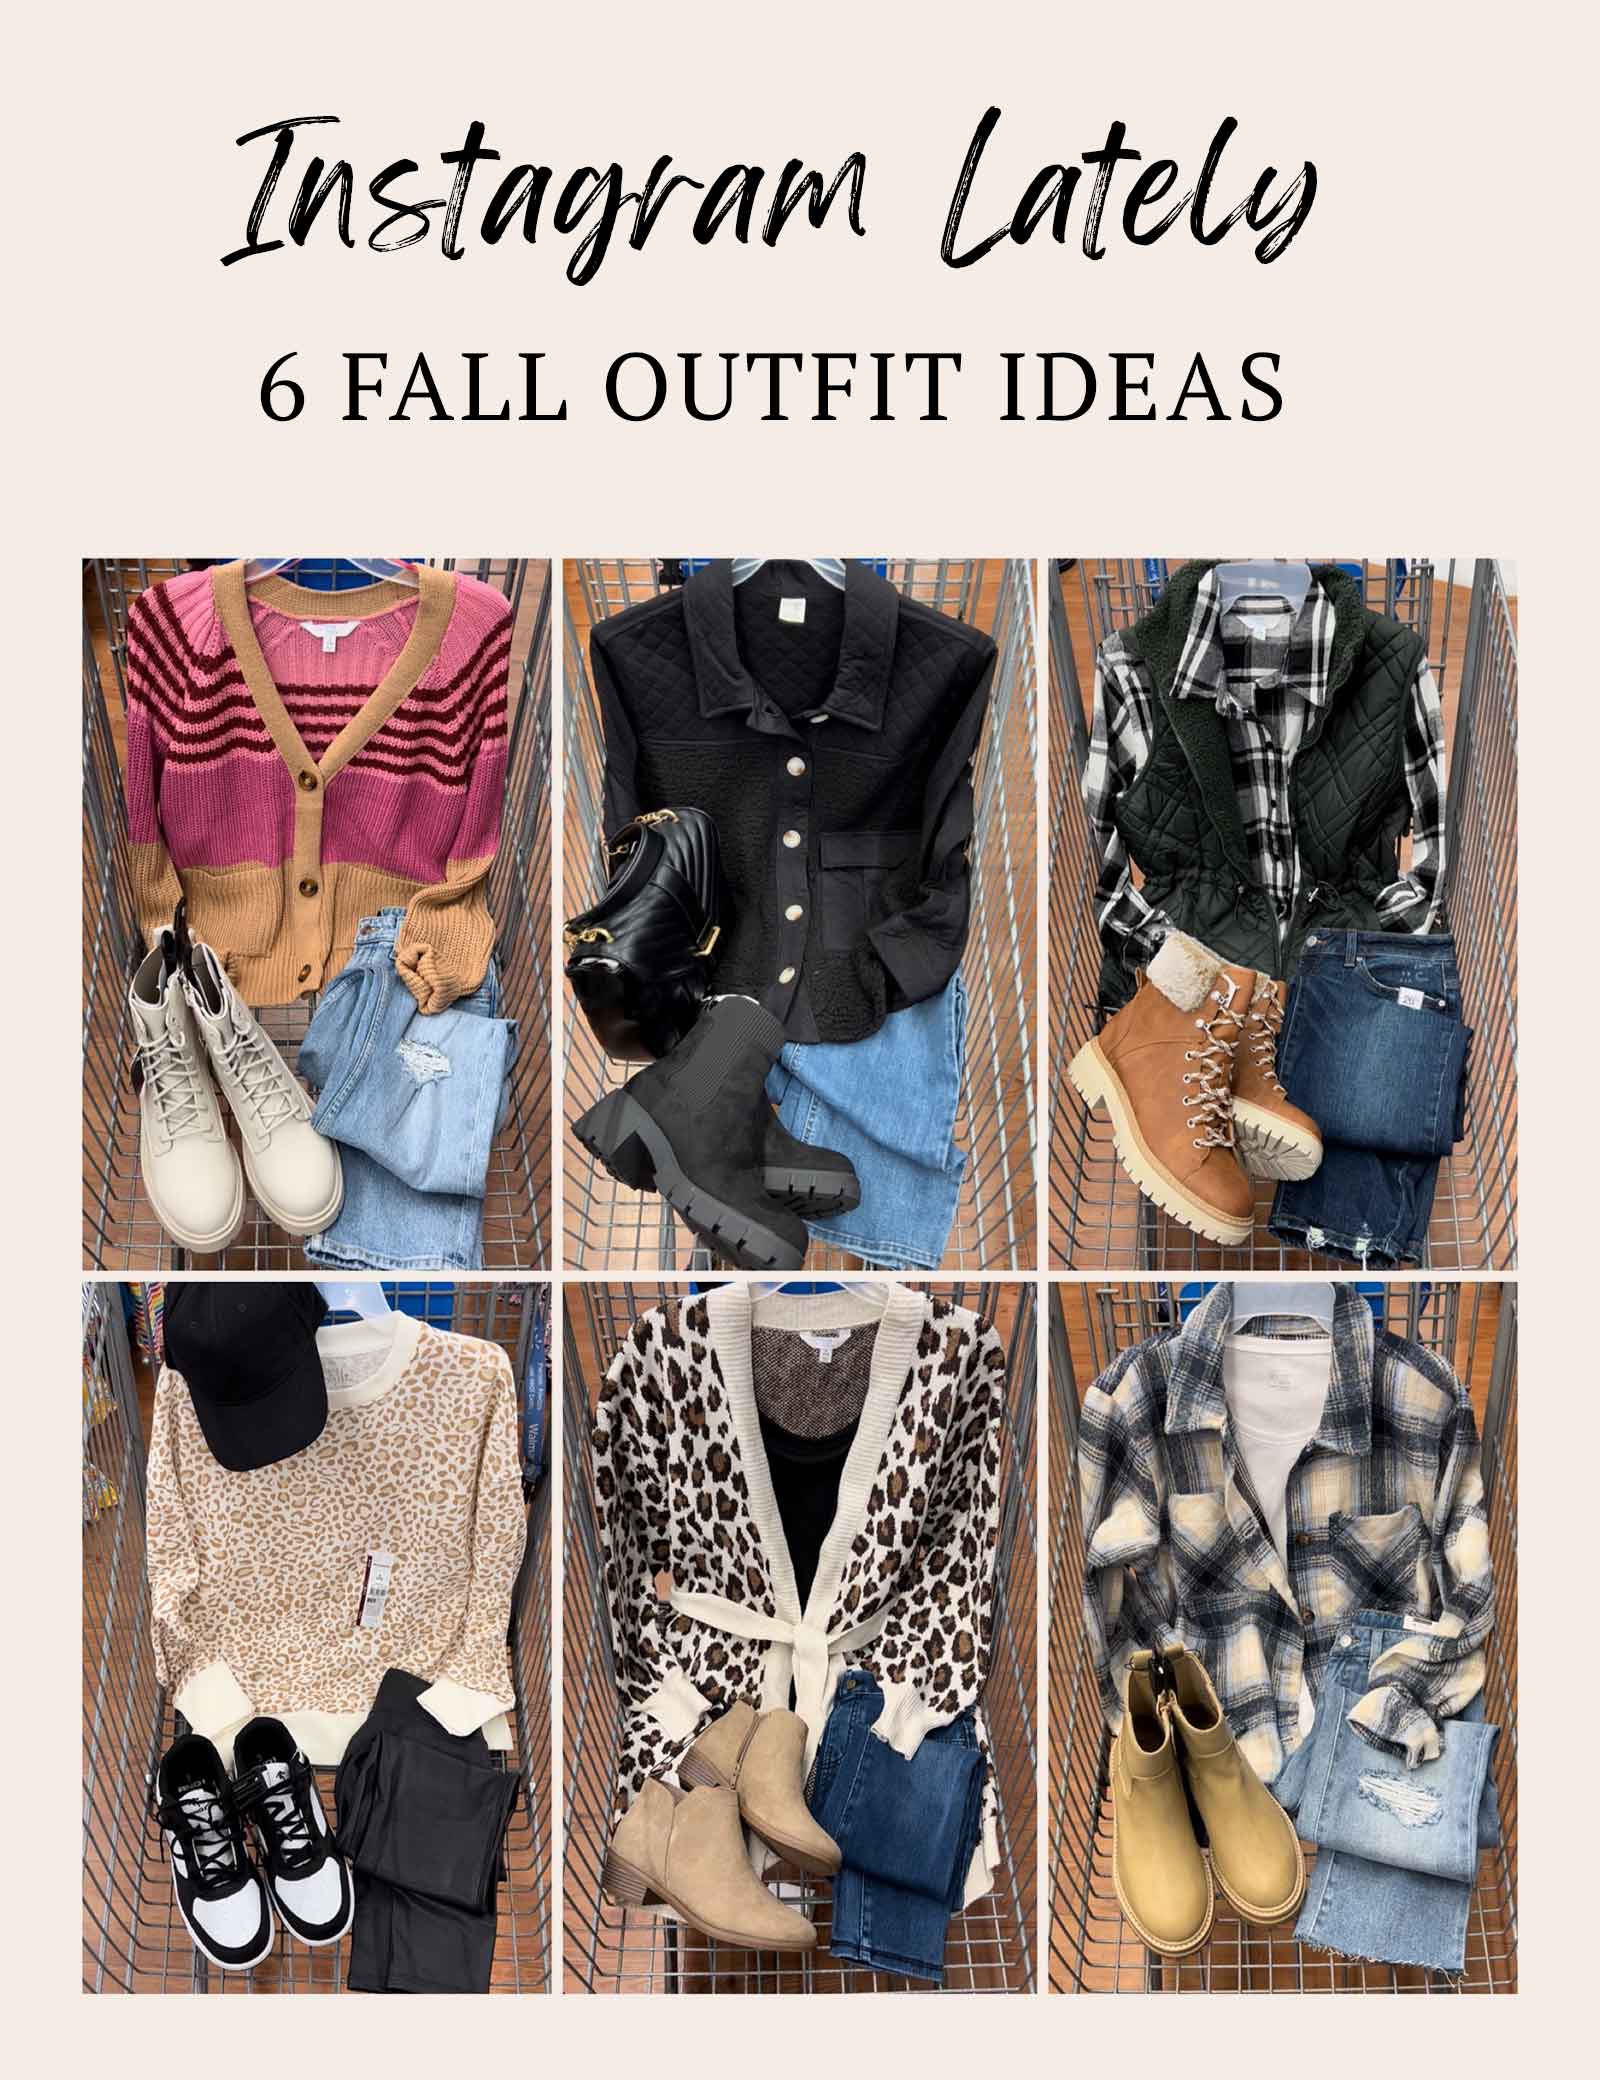 Instagram lately | 6 Fall Outfit Ideas